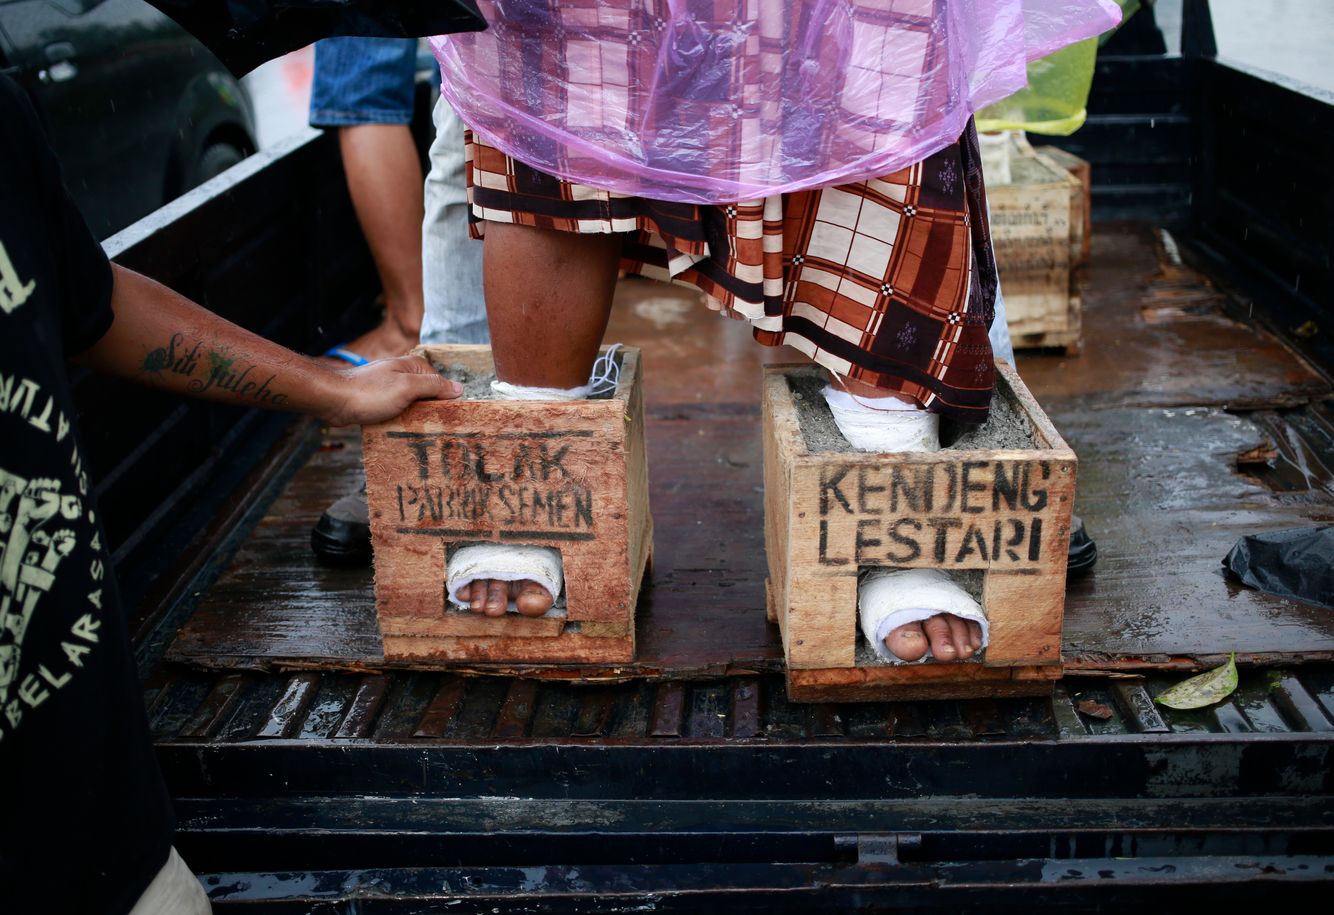 AP PHOTOS: Indonesian farmers cement feet to protest factory | The